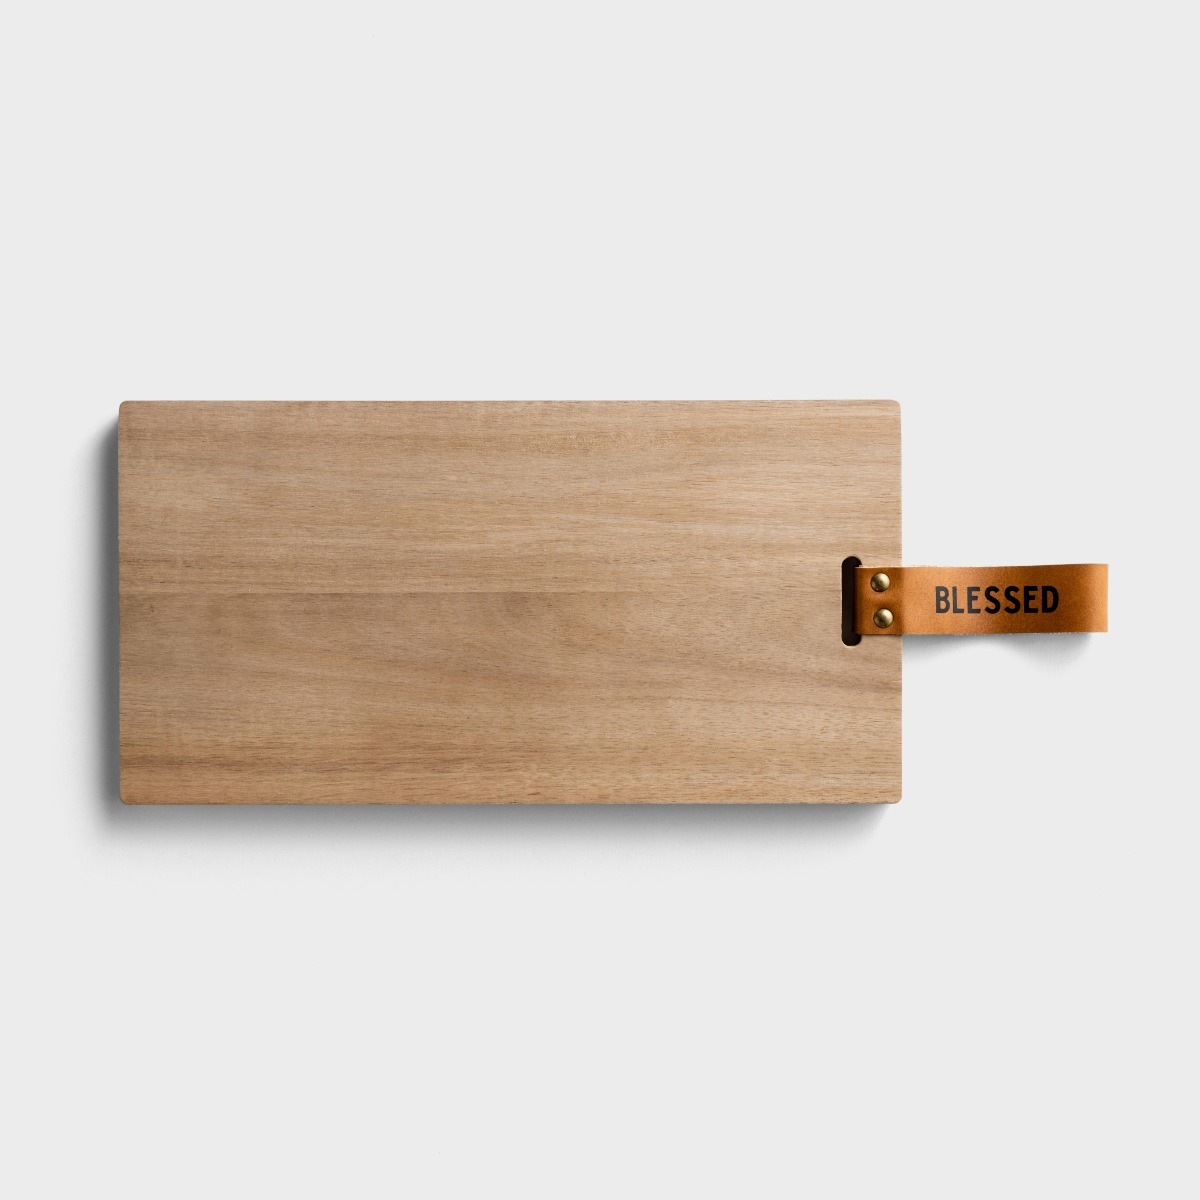 Blessed - Wooden Charcuterie and Serving Board